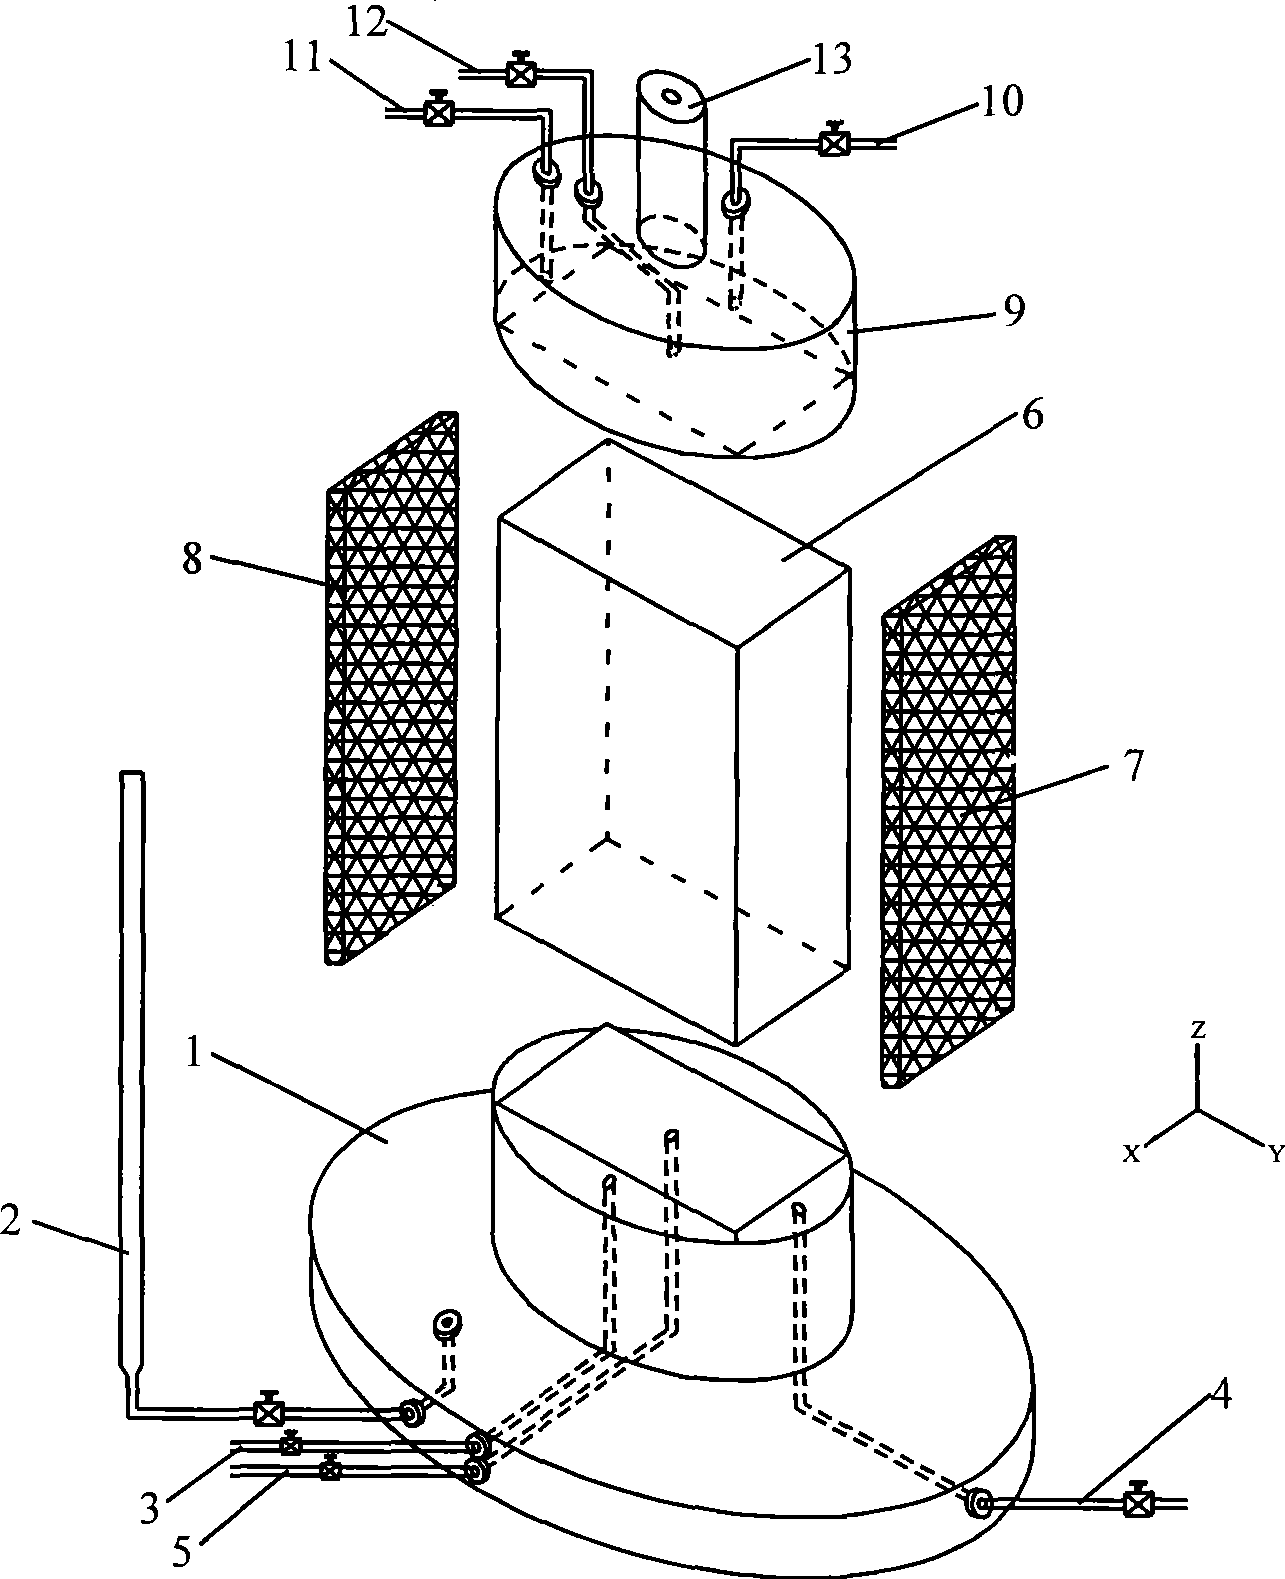 Three-axis infiltration experiment device